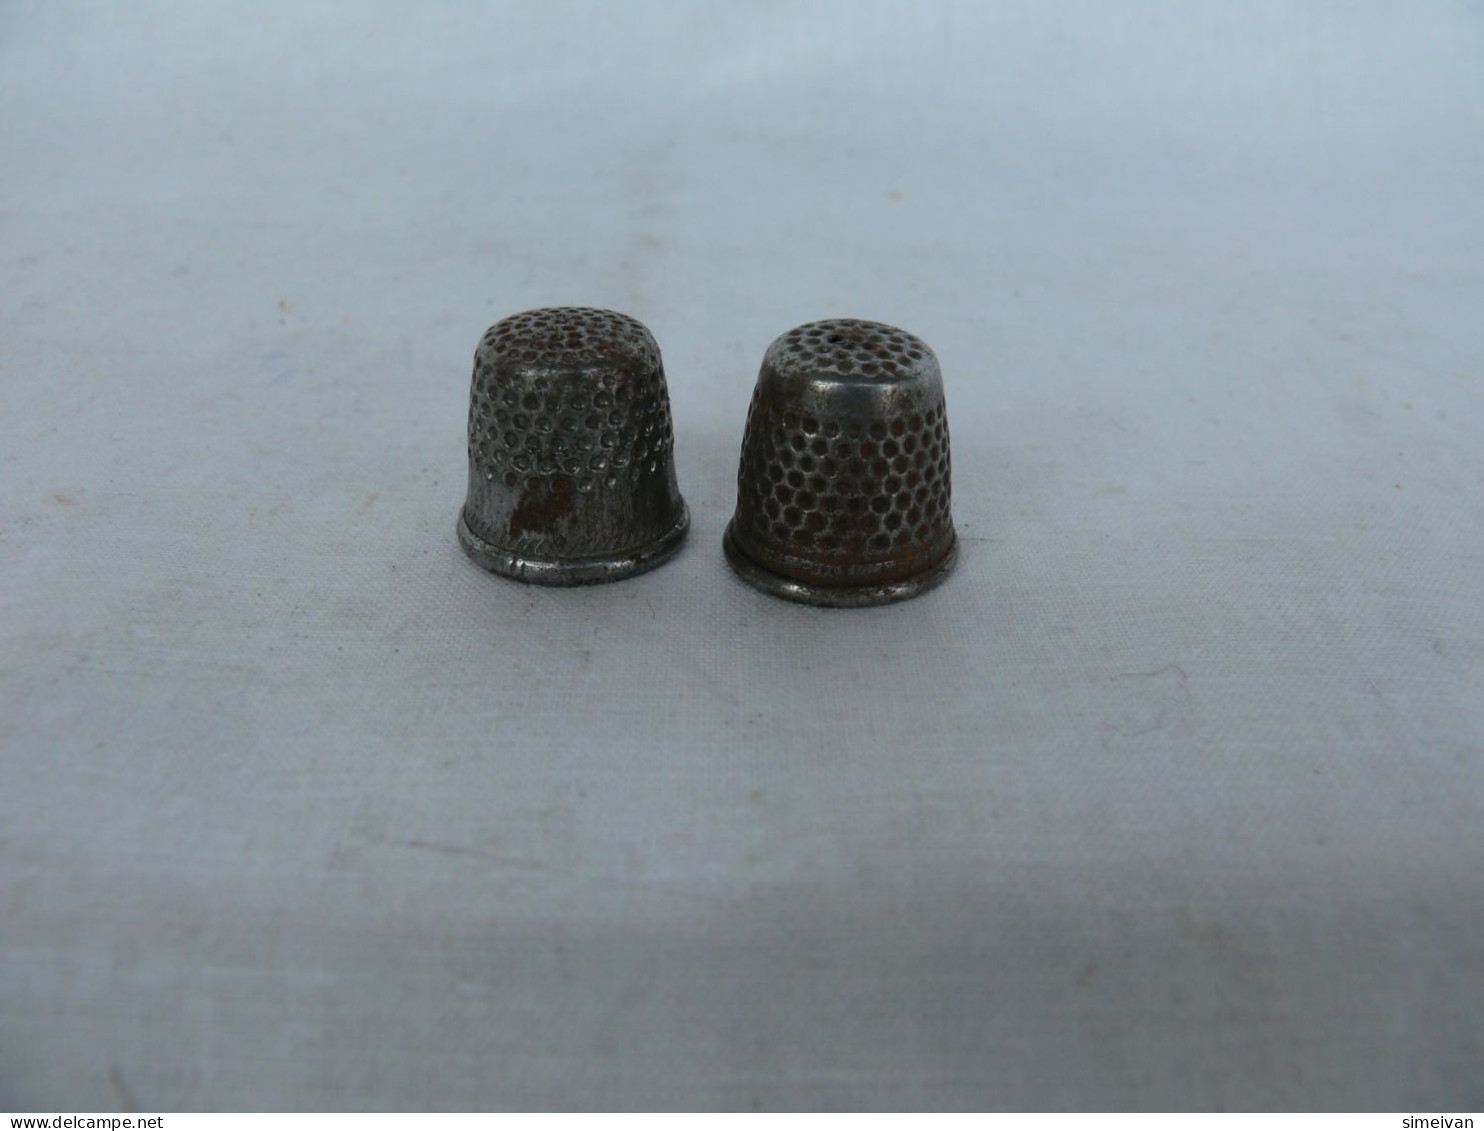 Vintage Two Metal Finger Thimble Protector Sewing Neеdle Shield #1556 - Fingerhüte